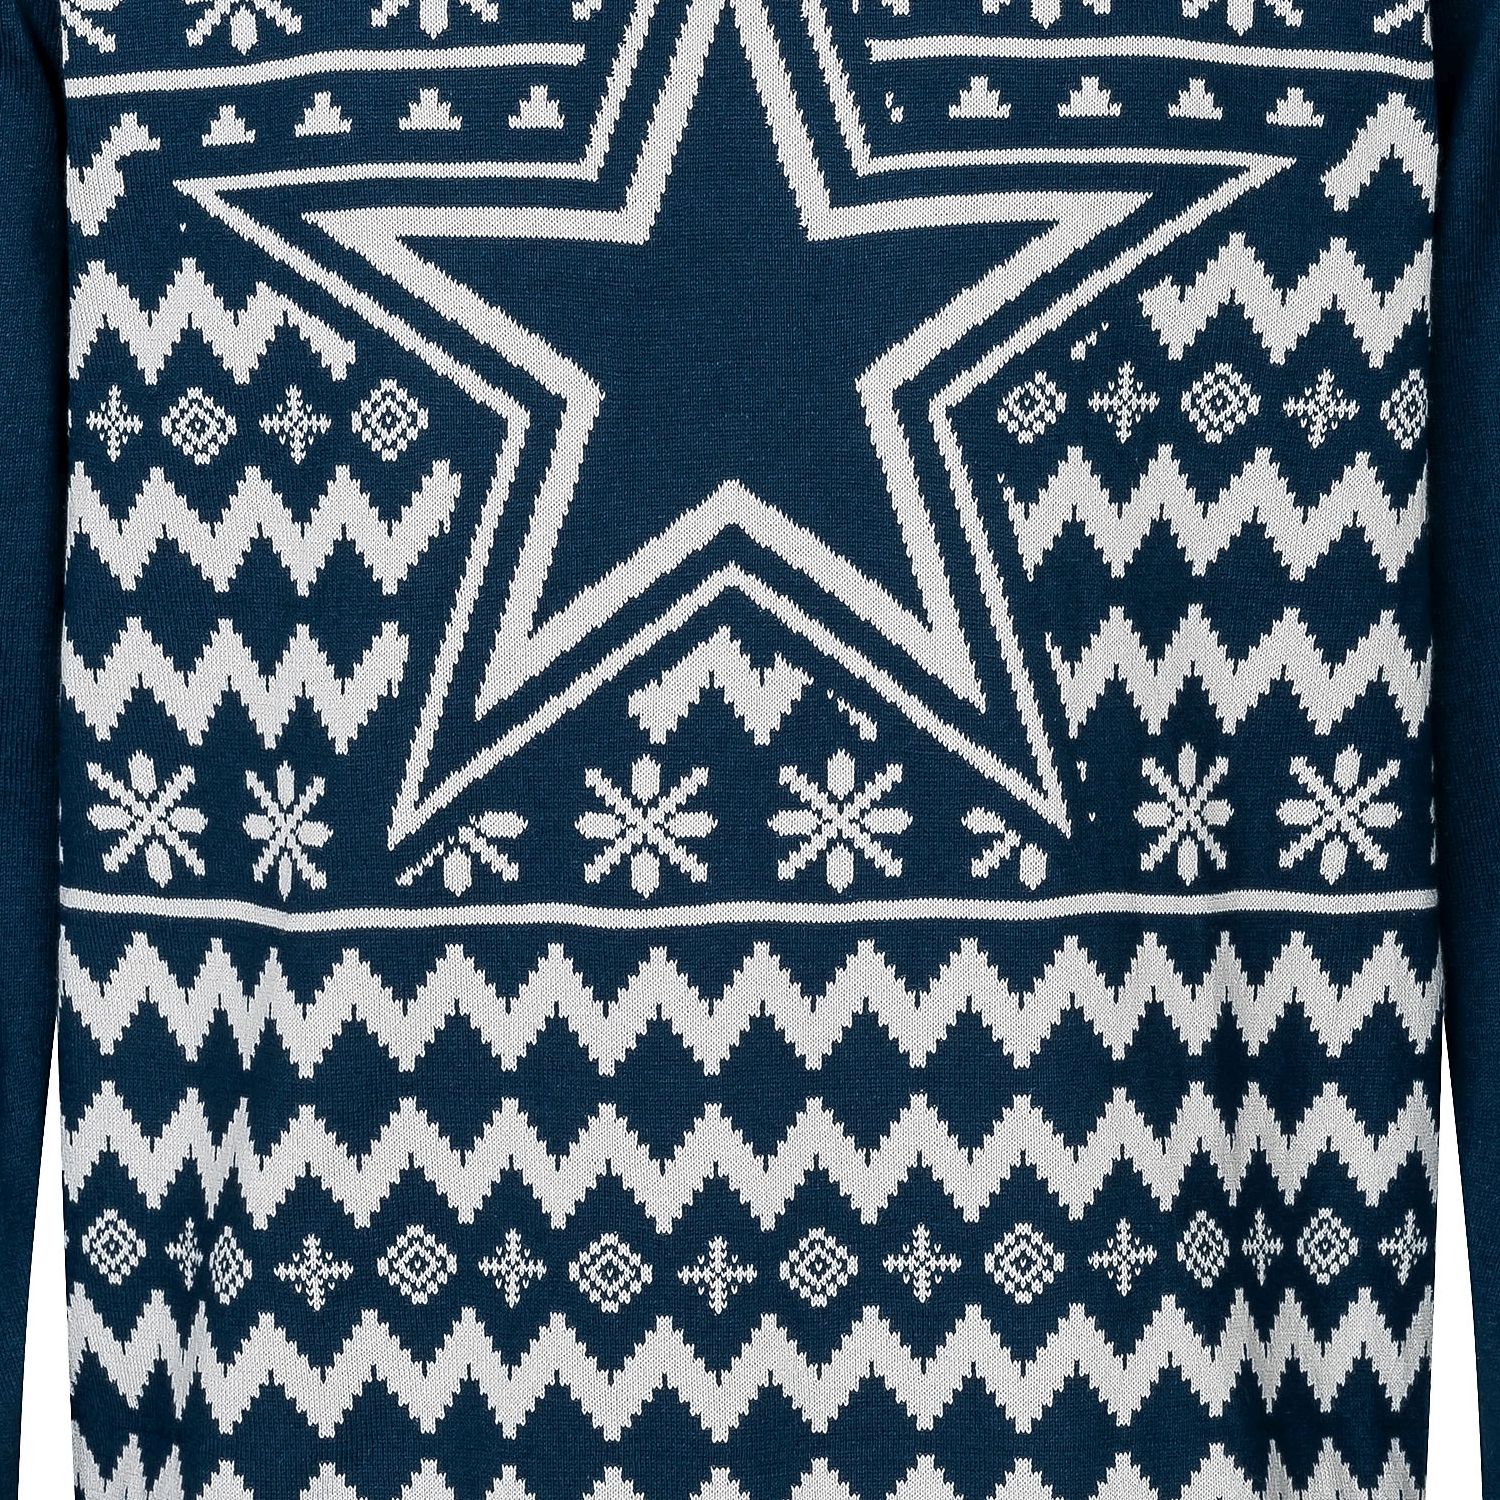 NFL Ugly Sweater Xmas Knit Pullover - Dallas Cowboys : : Sports &  Outdoors